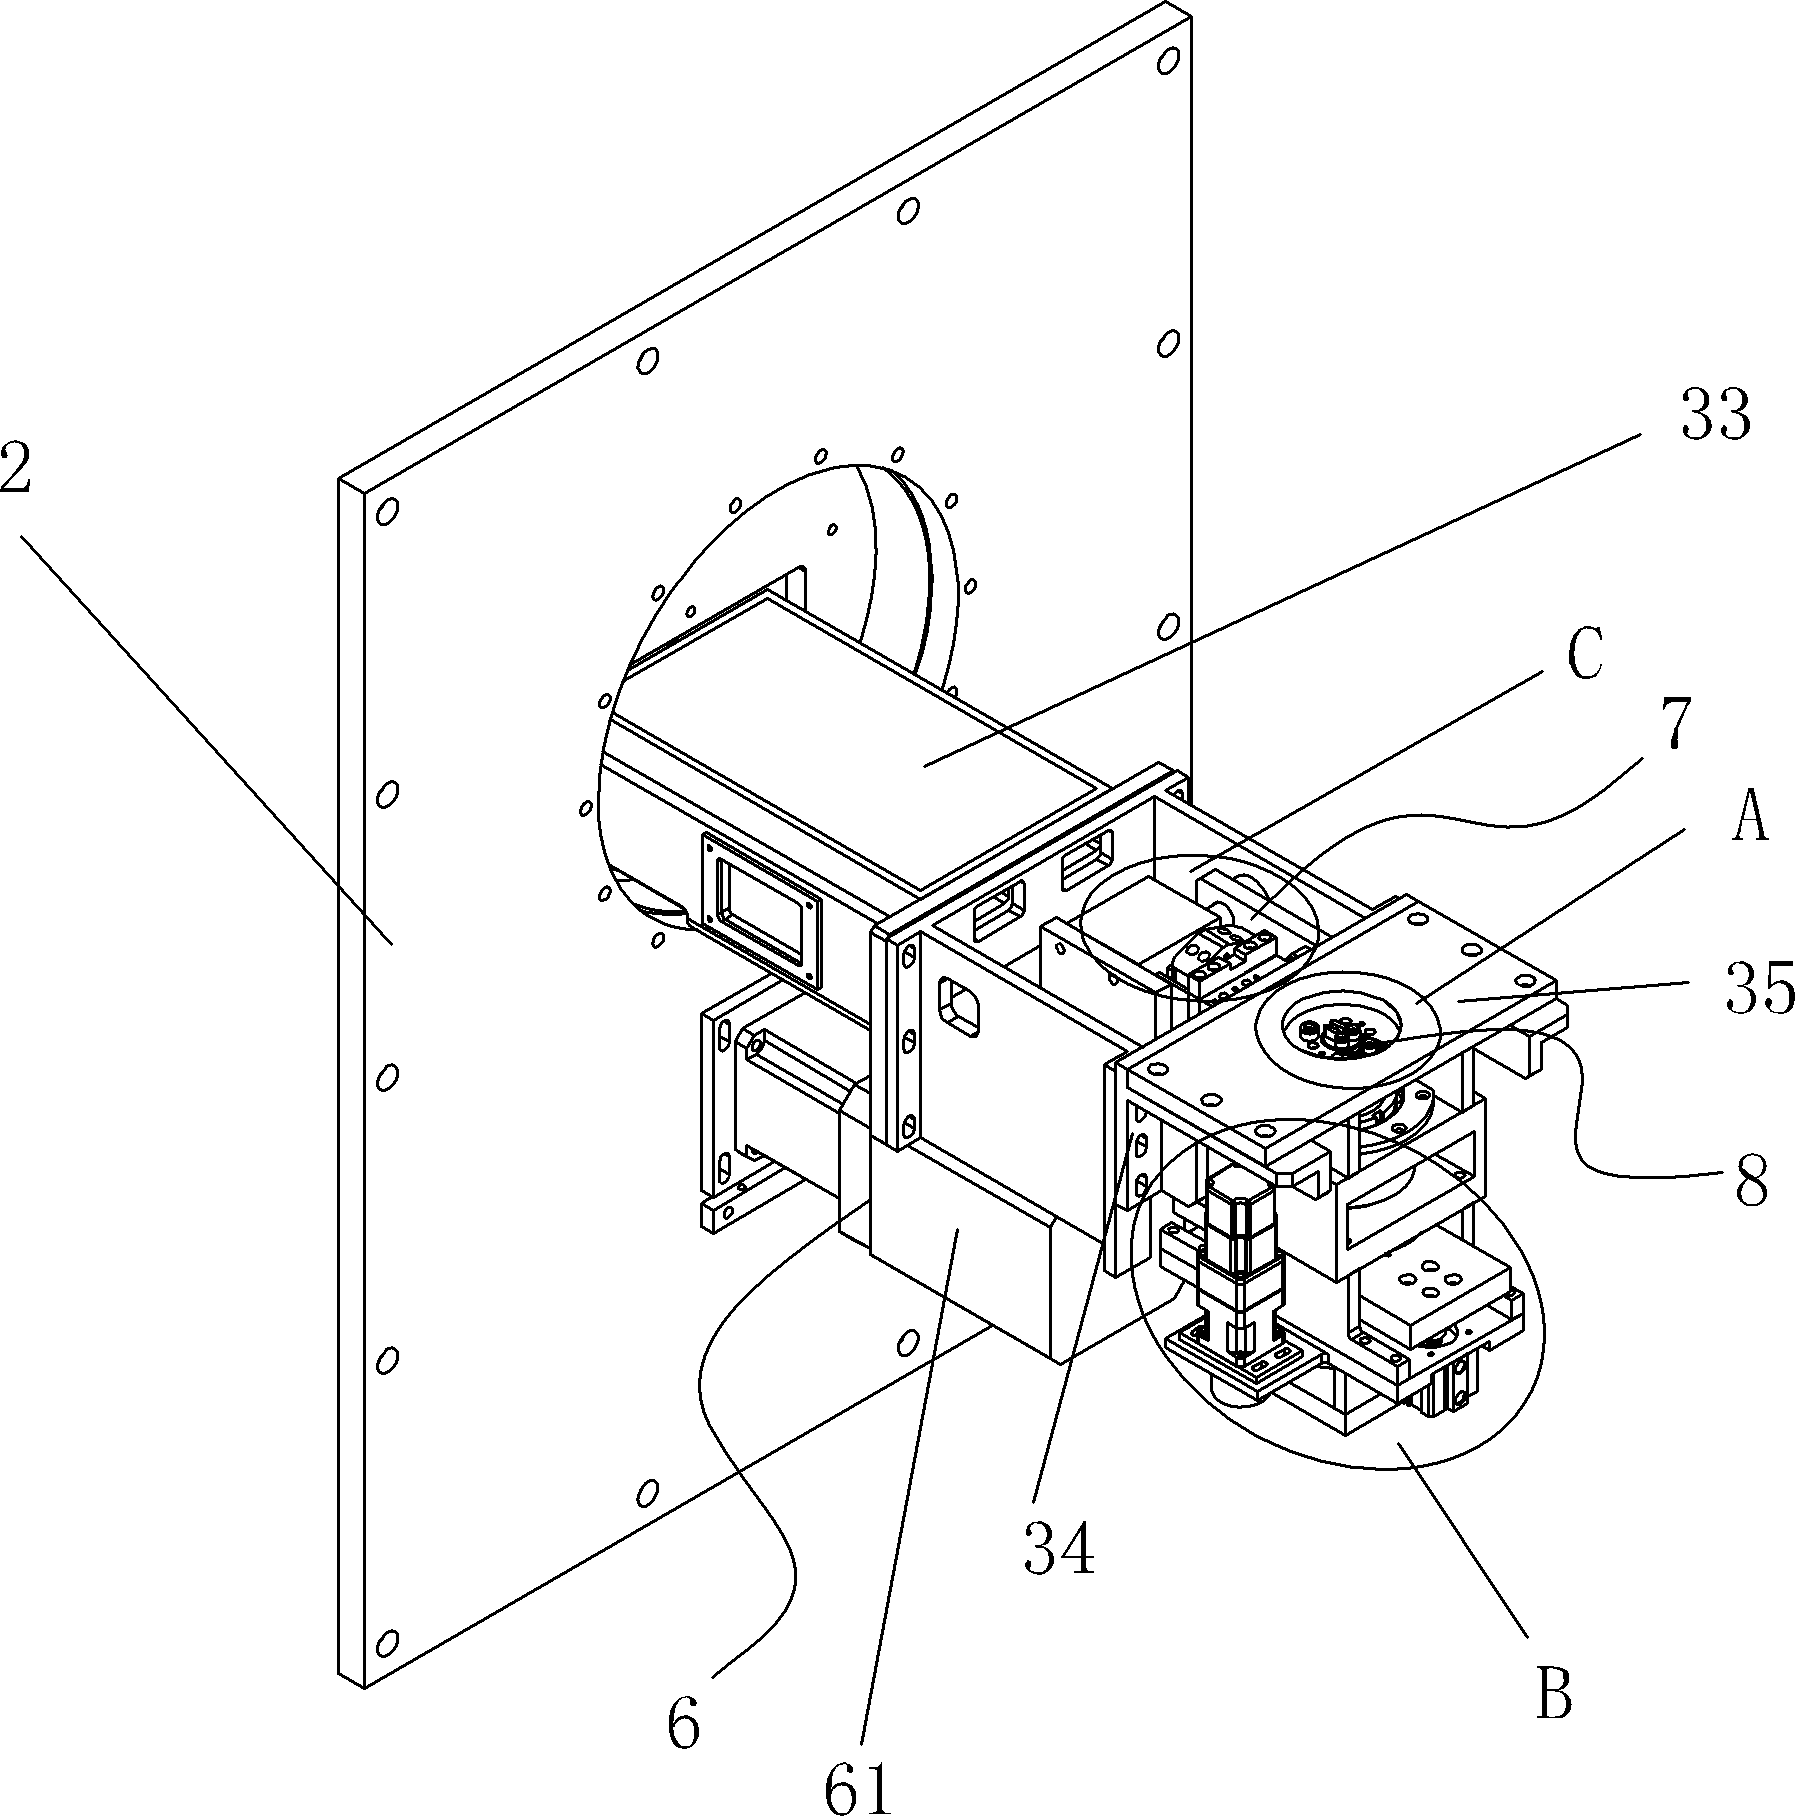 Device for bending wire